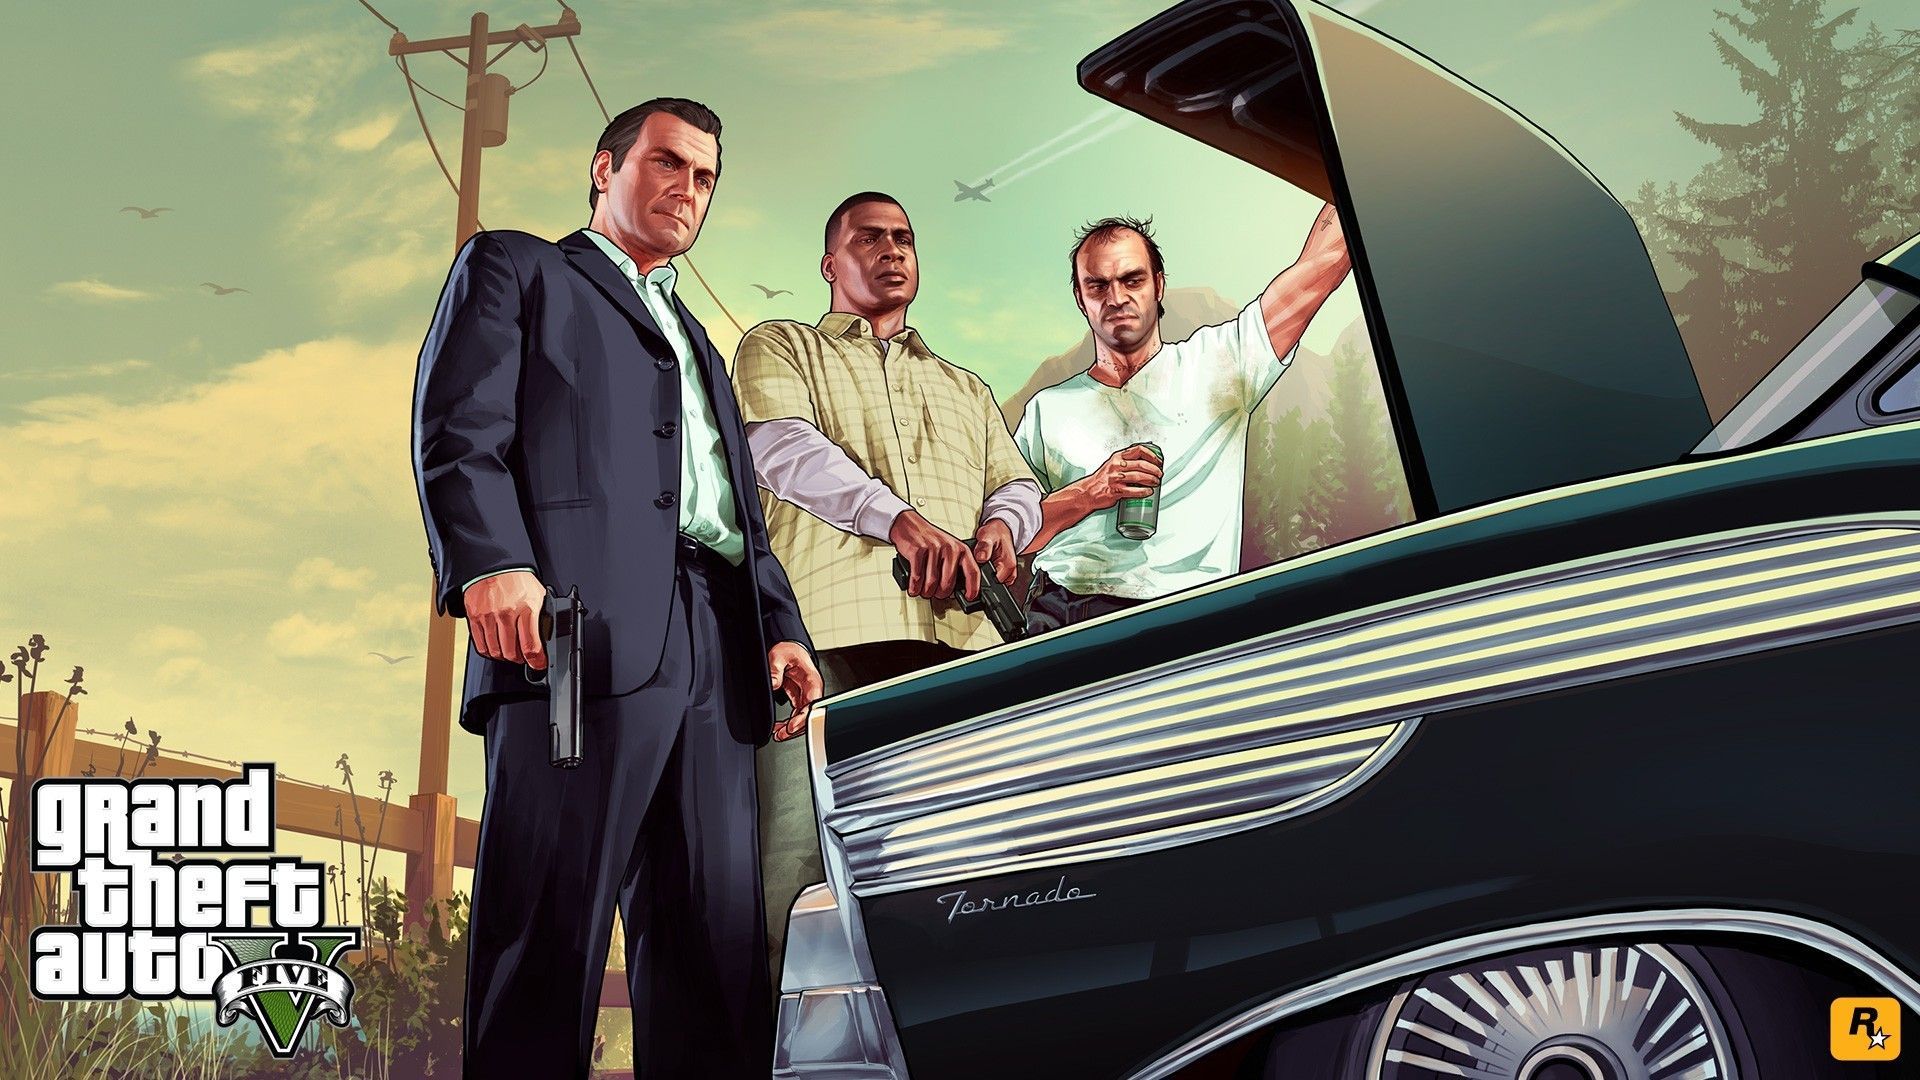 Grand Theft Auto Characters Wallpaper Free Grand Theft Auto Characters Background